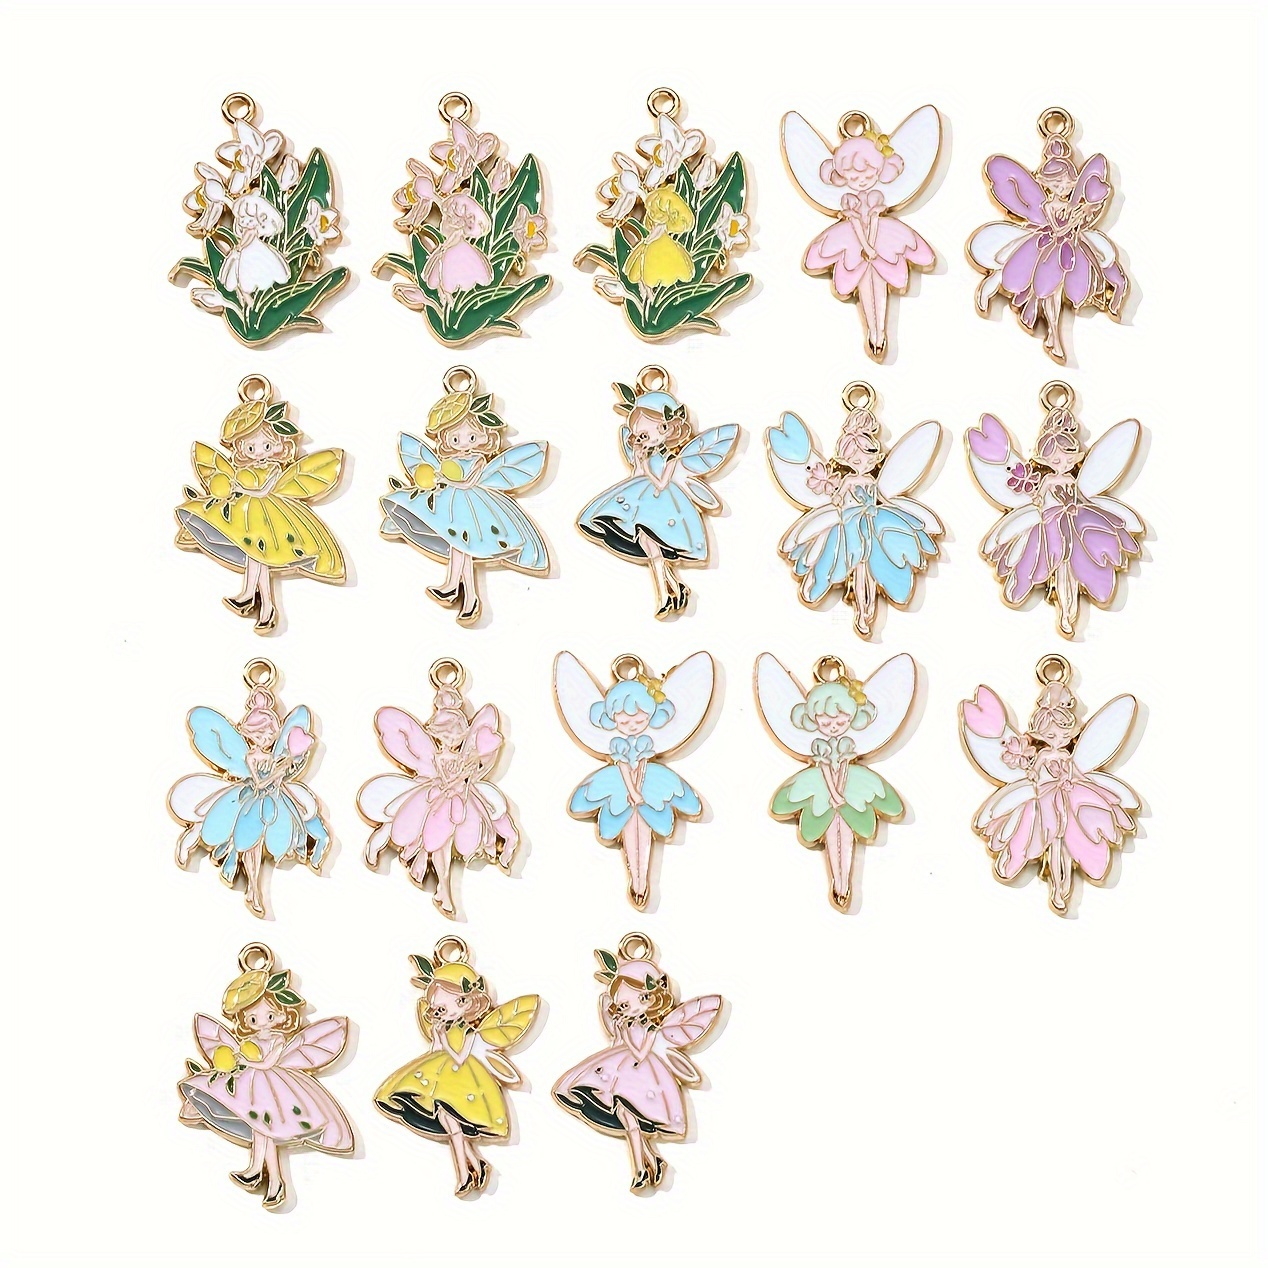 

Nxqxn Zinc Alloy Fairy Charms, 10/20 Pcs Mixed Enamel Butterfly Fairy Pendant Set For Diy Jewelry Making, Necklace & Earring Crafting Supplies